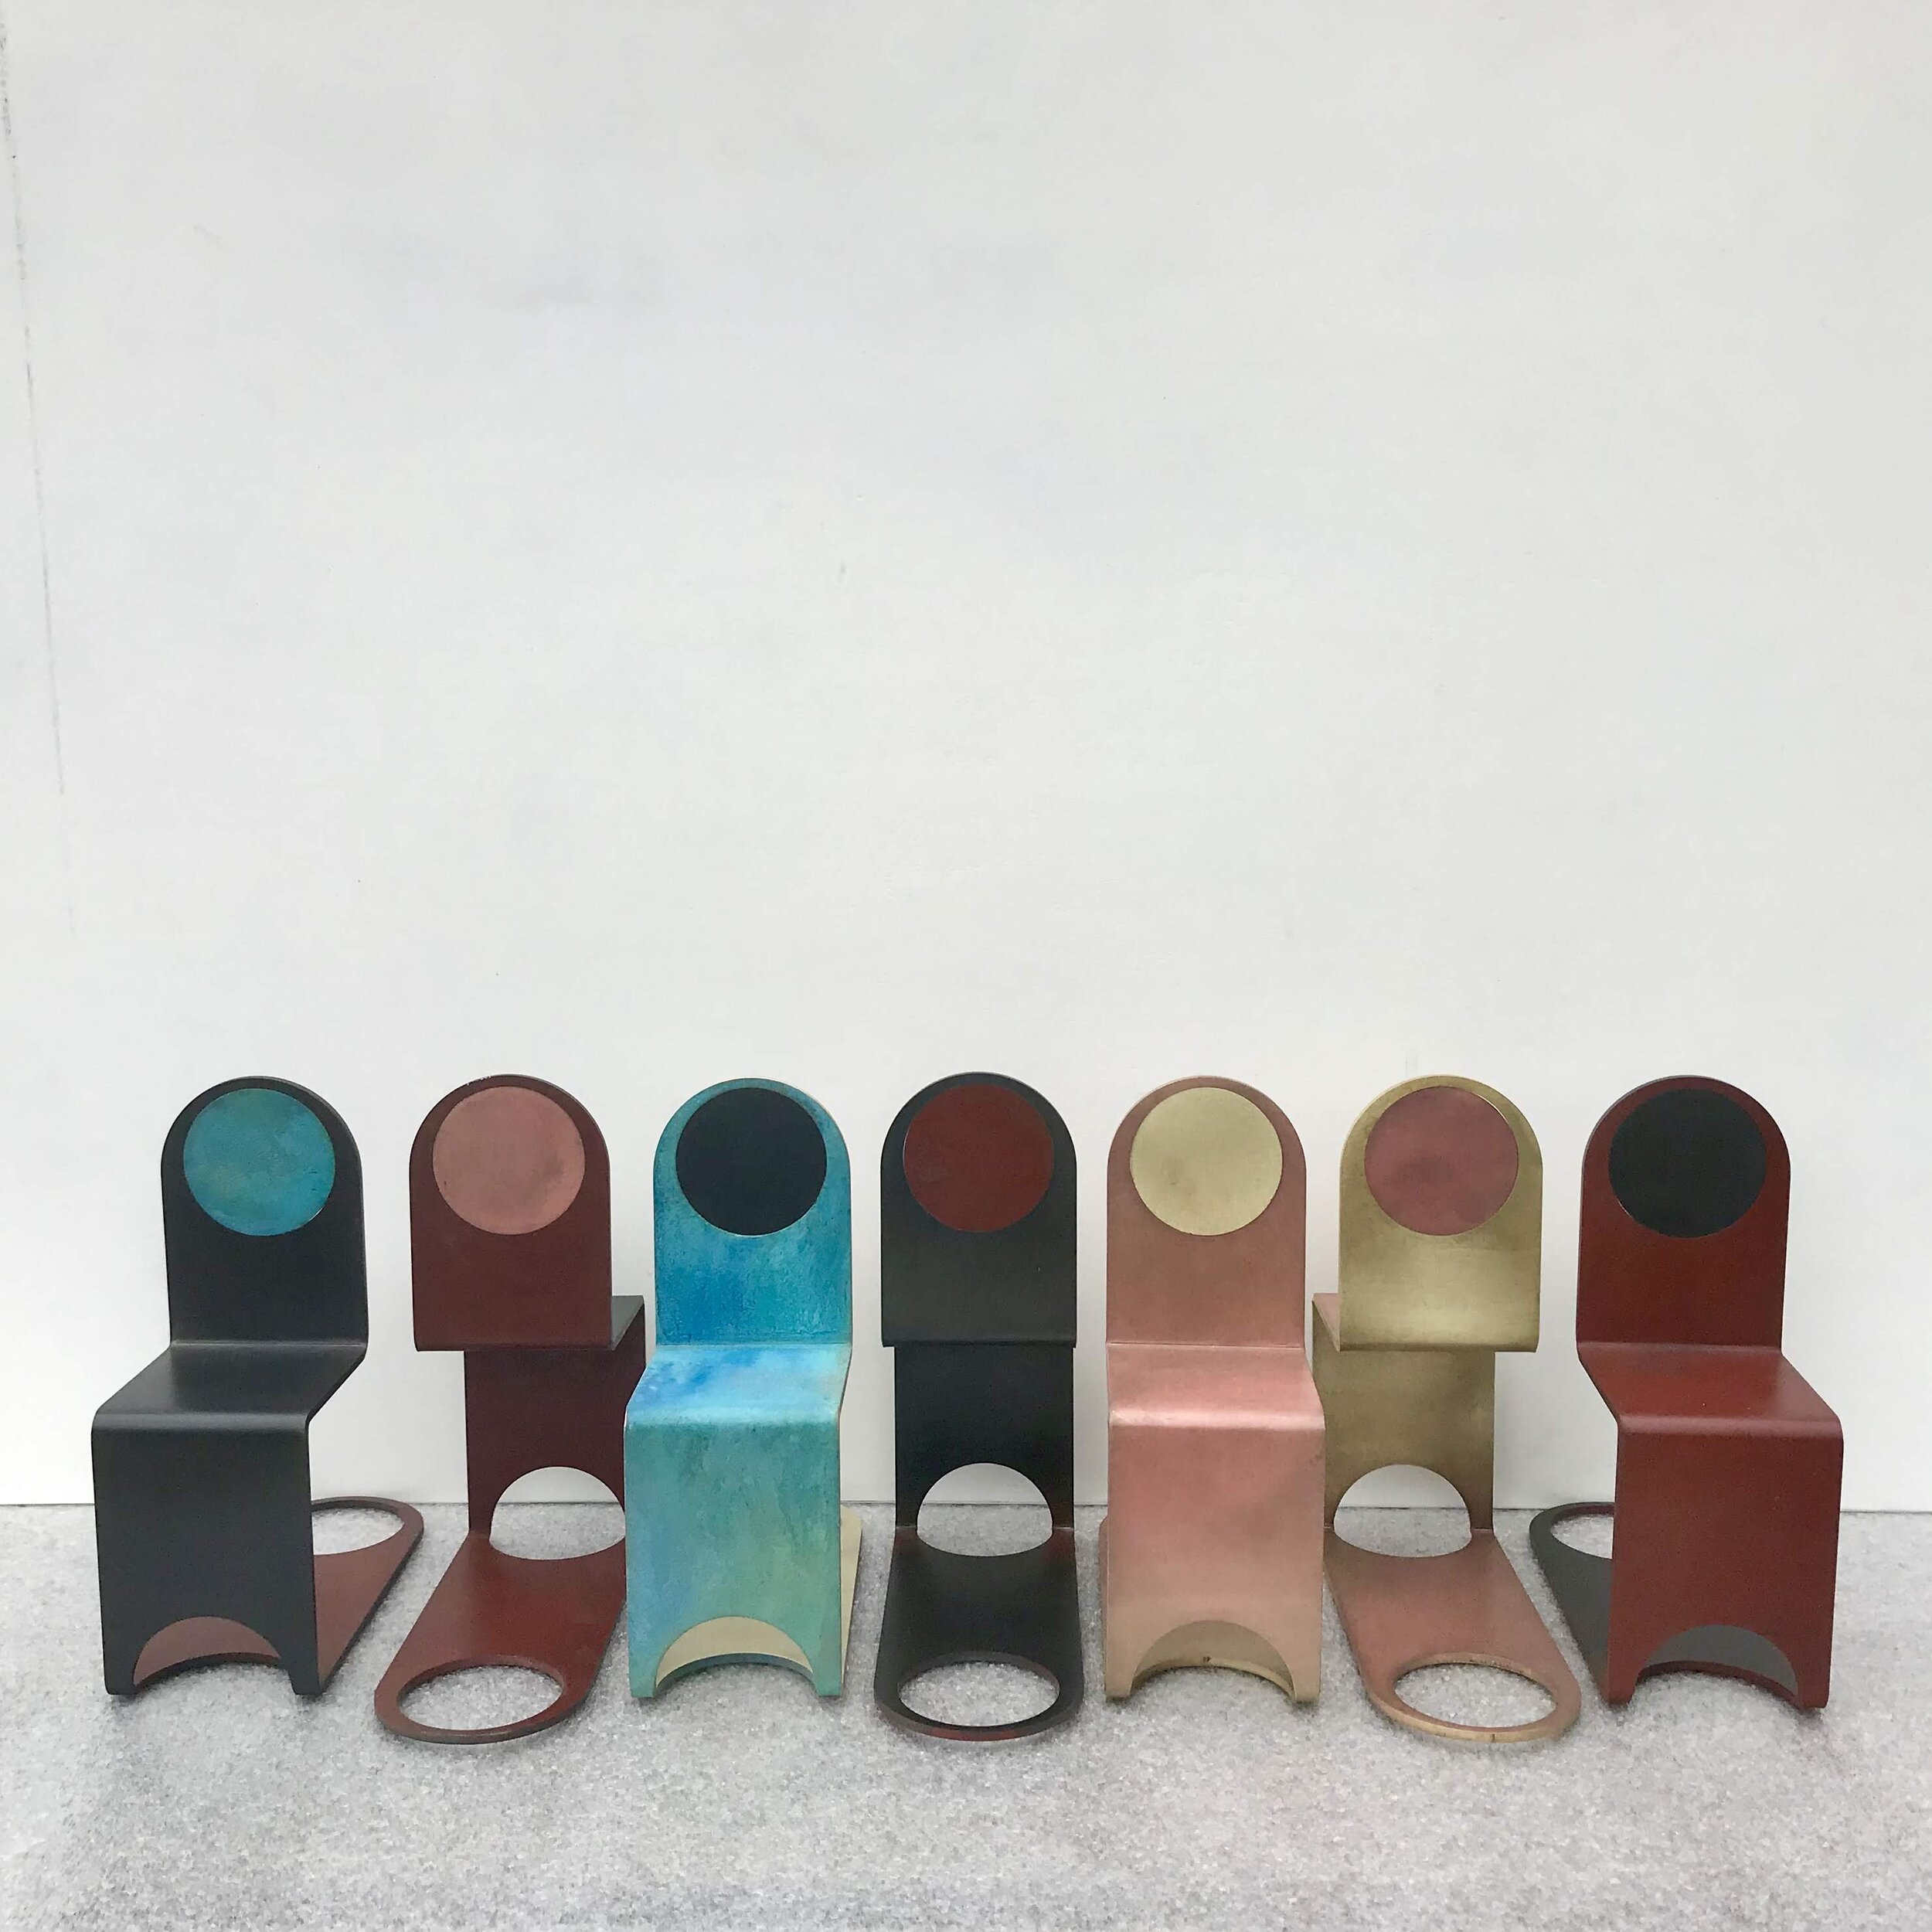  Patinated book ends designed by Kin and Company 